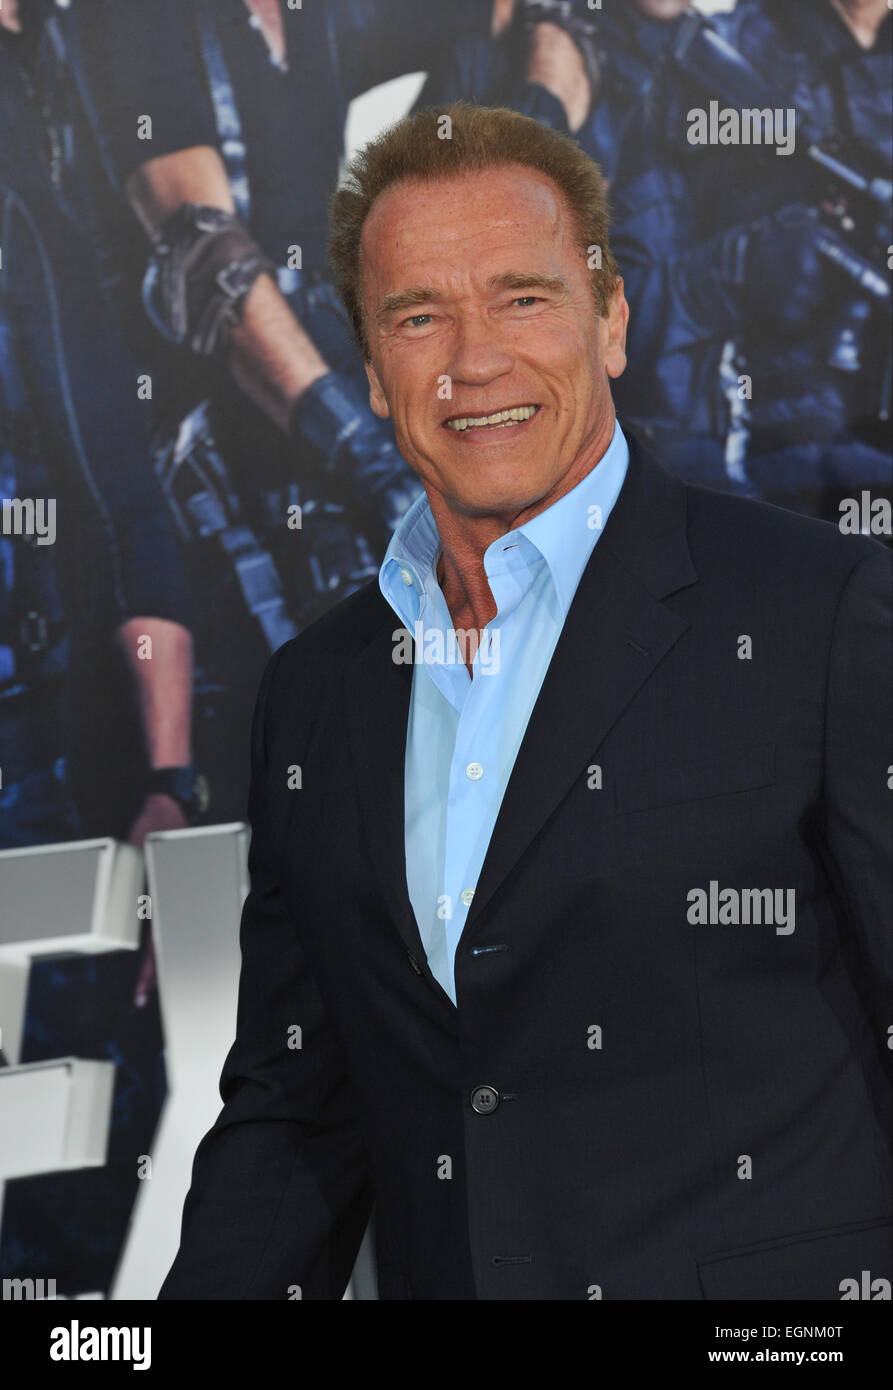 LOS ANGELES, CA - AUGUST 11, 2014: Arnold Schwarzenegger at the Los Angeles premiere of his movie 'The Expendables 3' at the TCL Chinese Theatre, Hollywood. Stock Photo